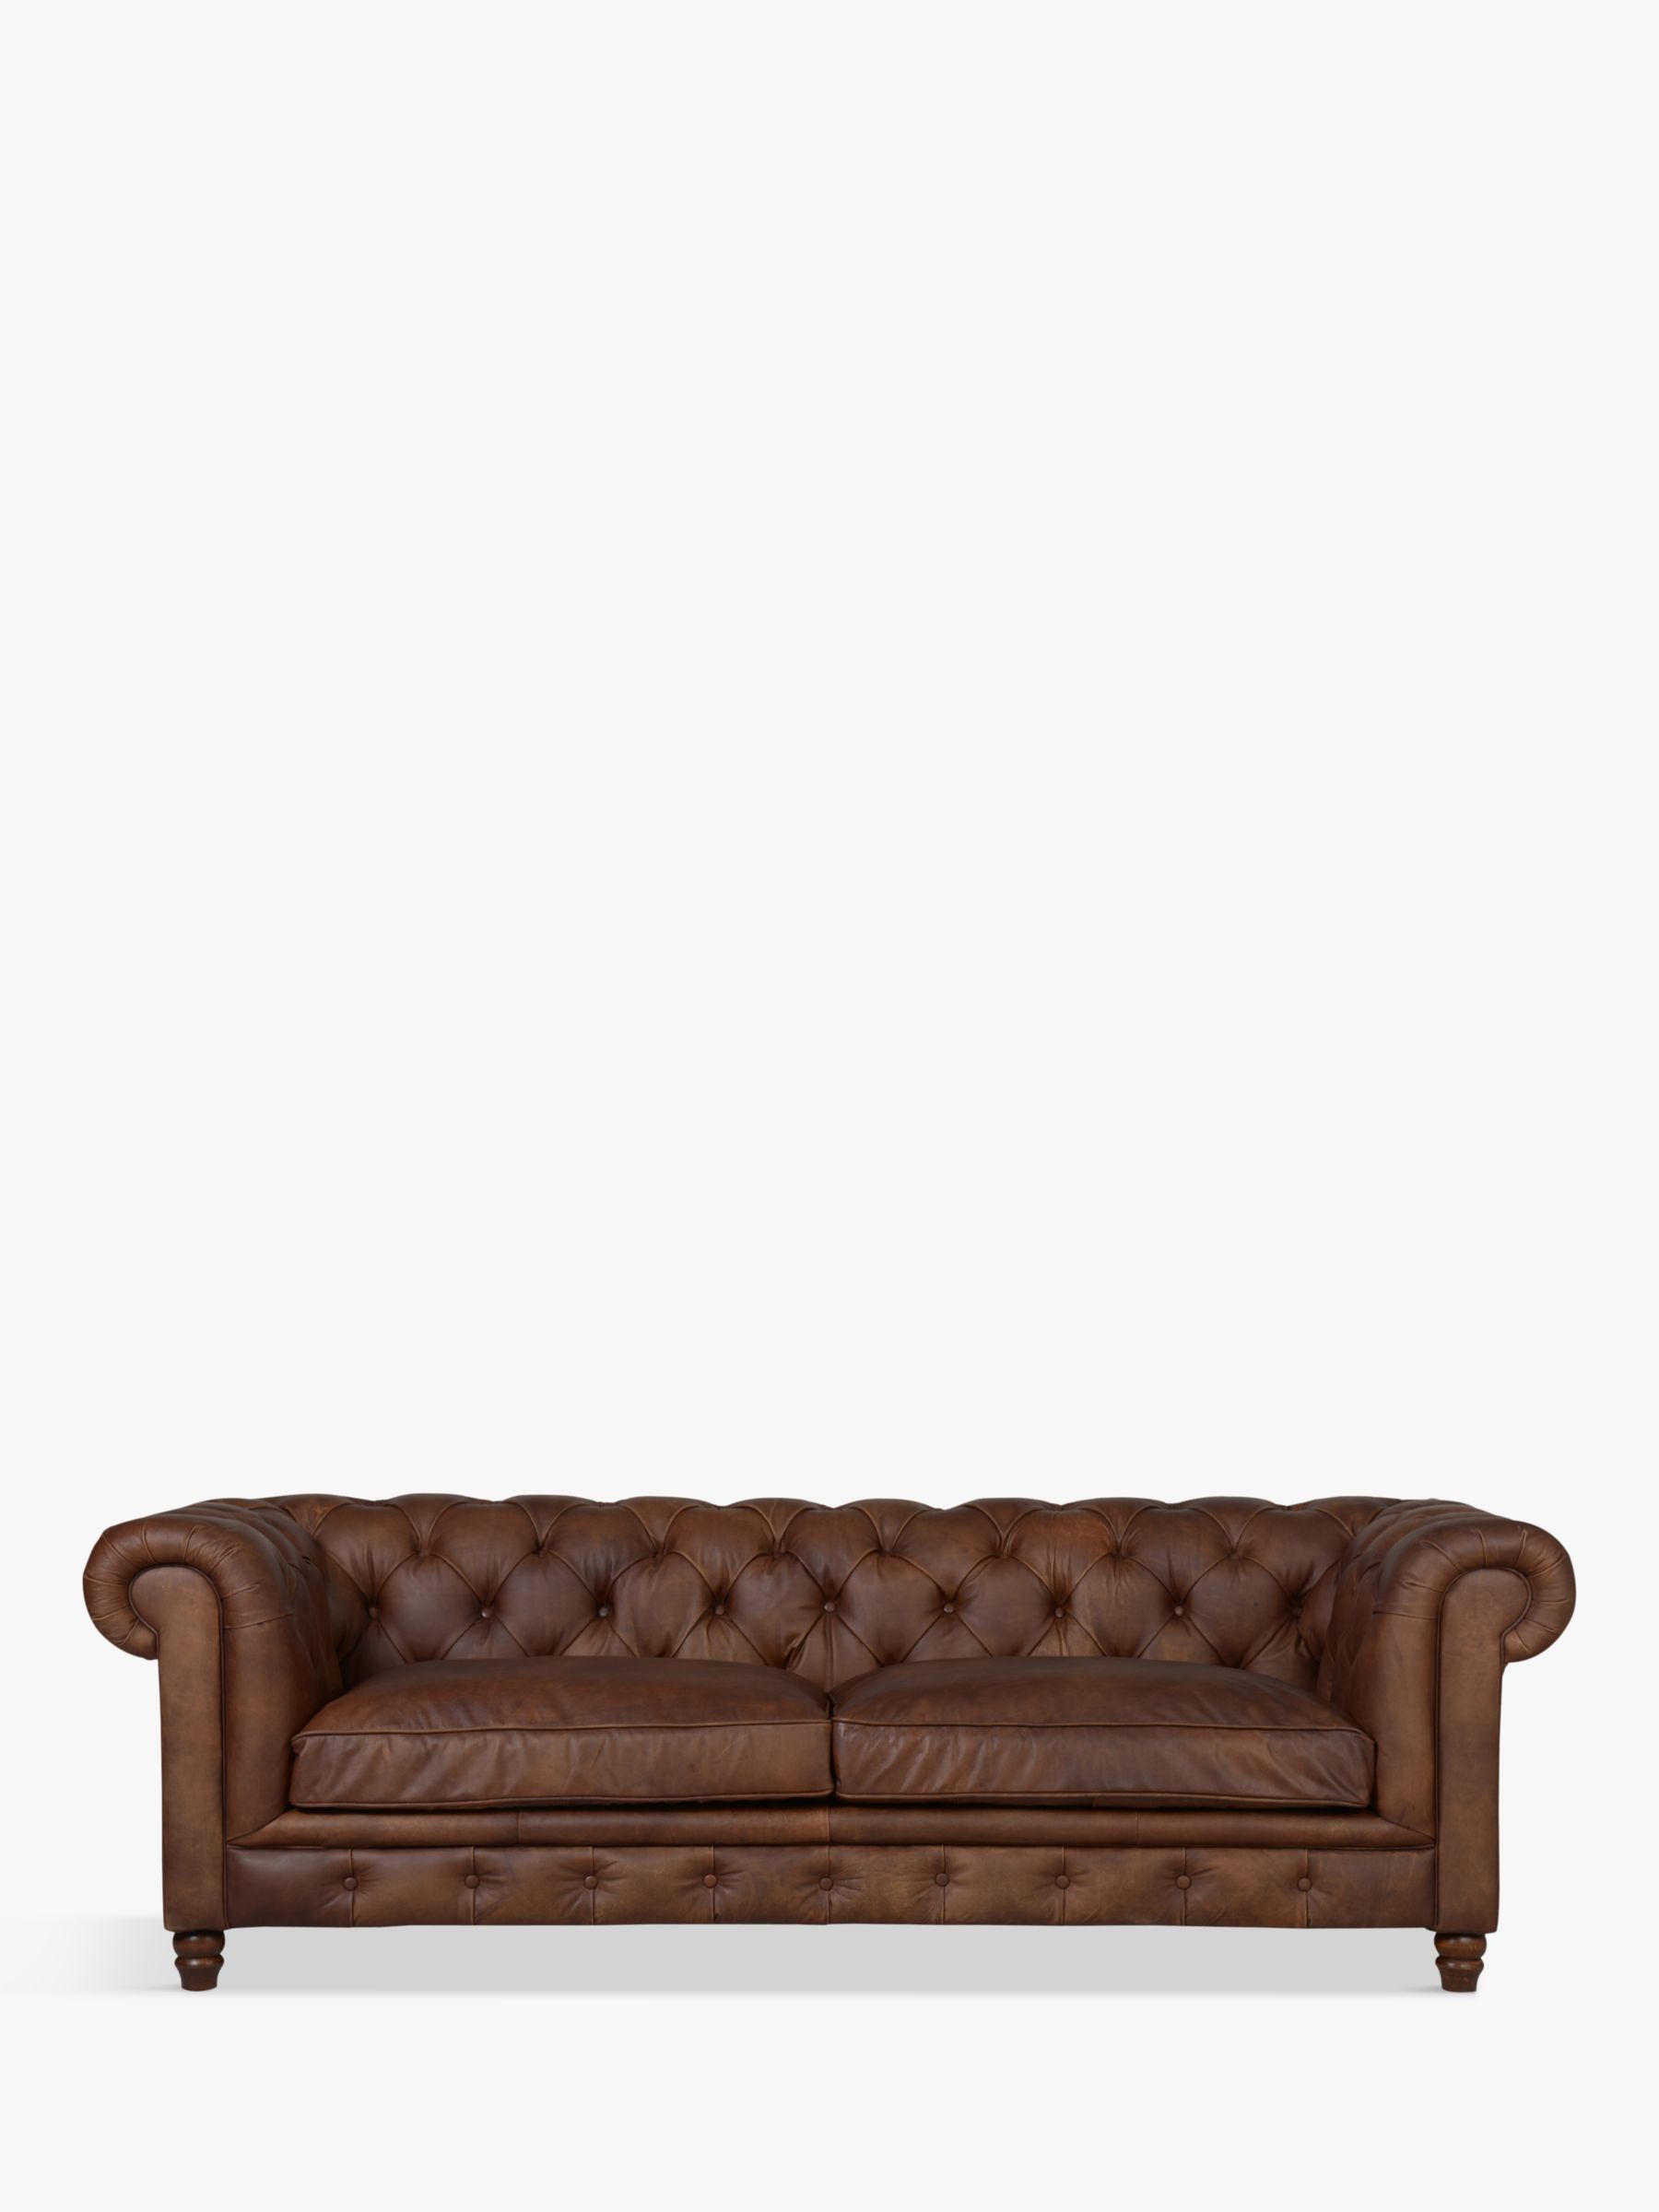 Photo of Halo earle chesterfield grand 4 seater leather sofa